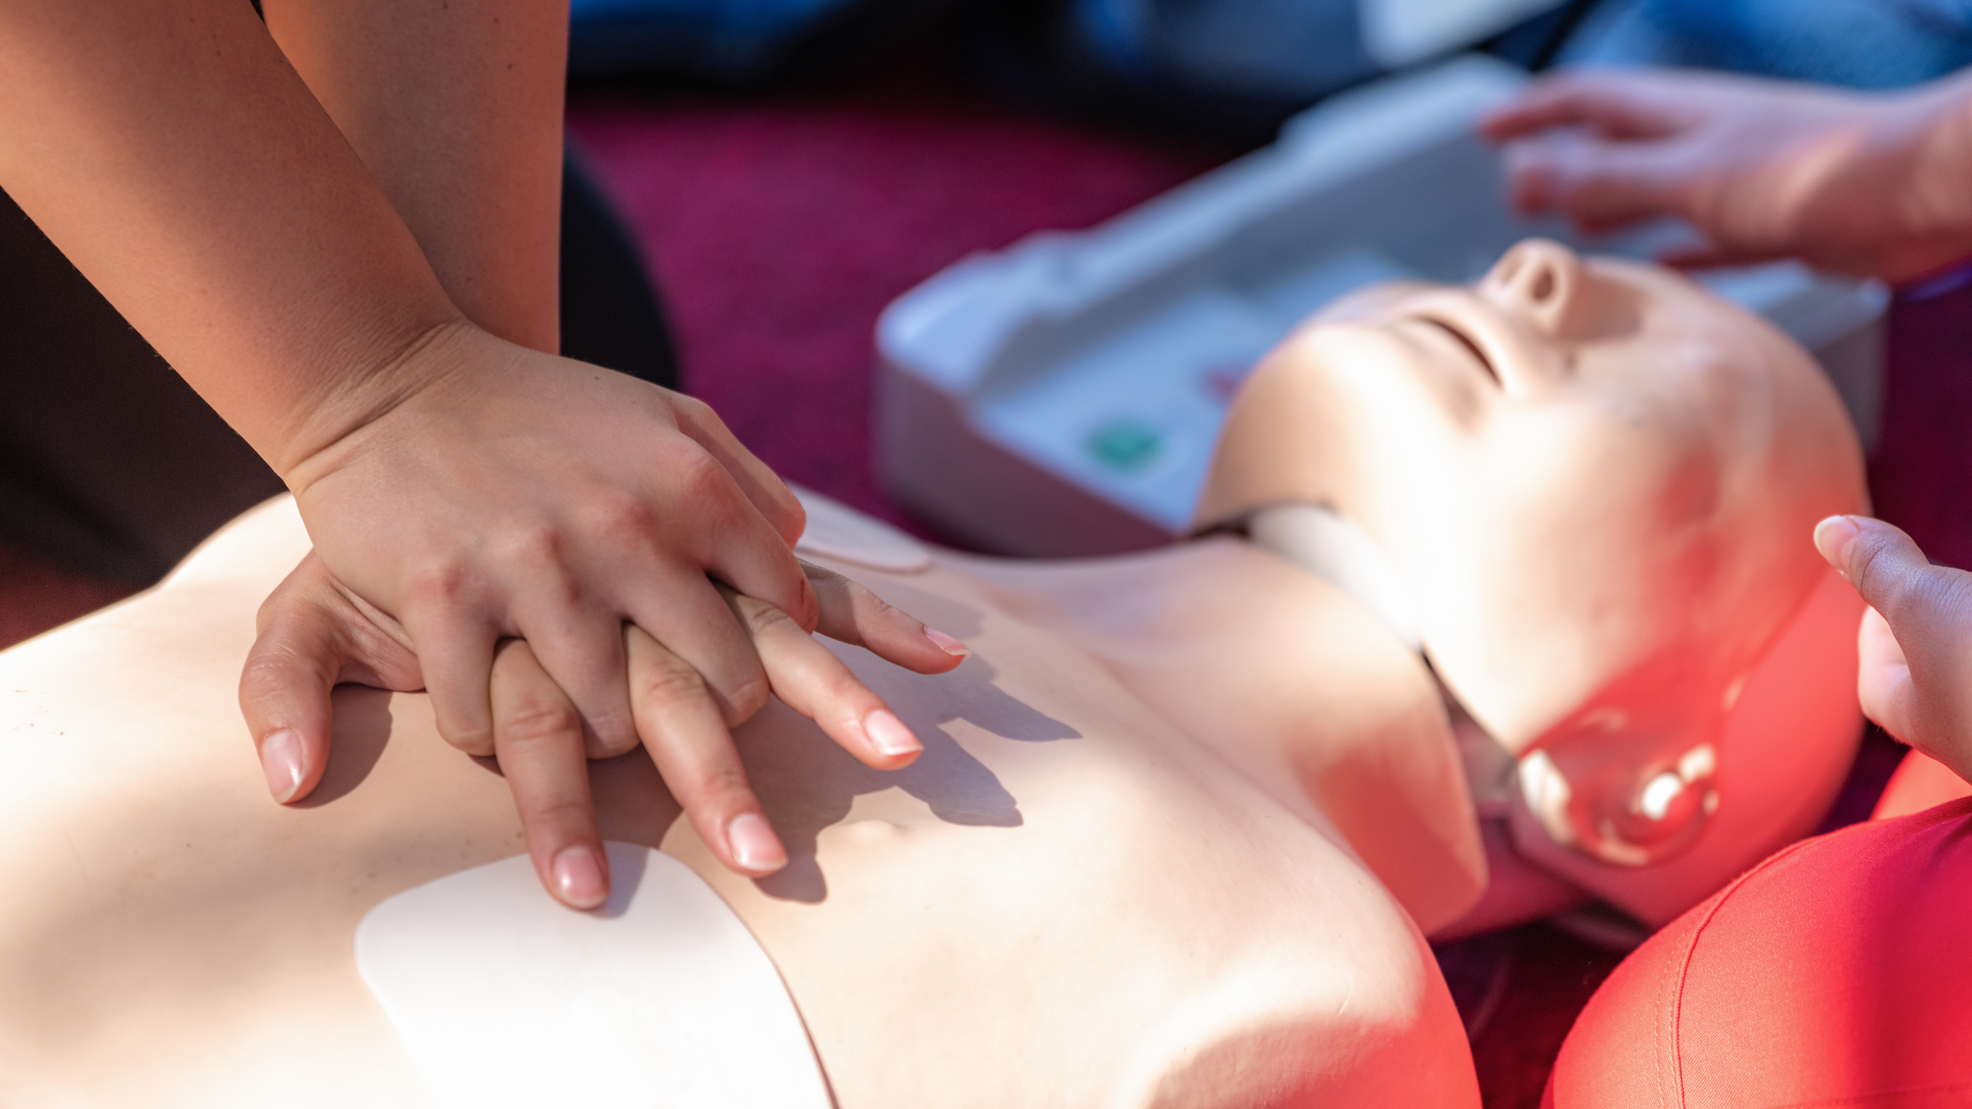 Featured image for “Why Everyone Can Benefit from CPR Training | Who Should Learn CPR?”